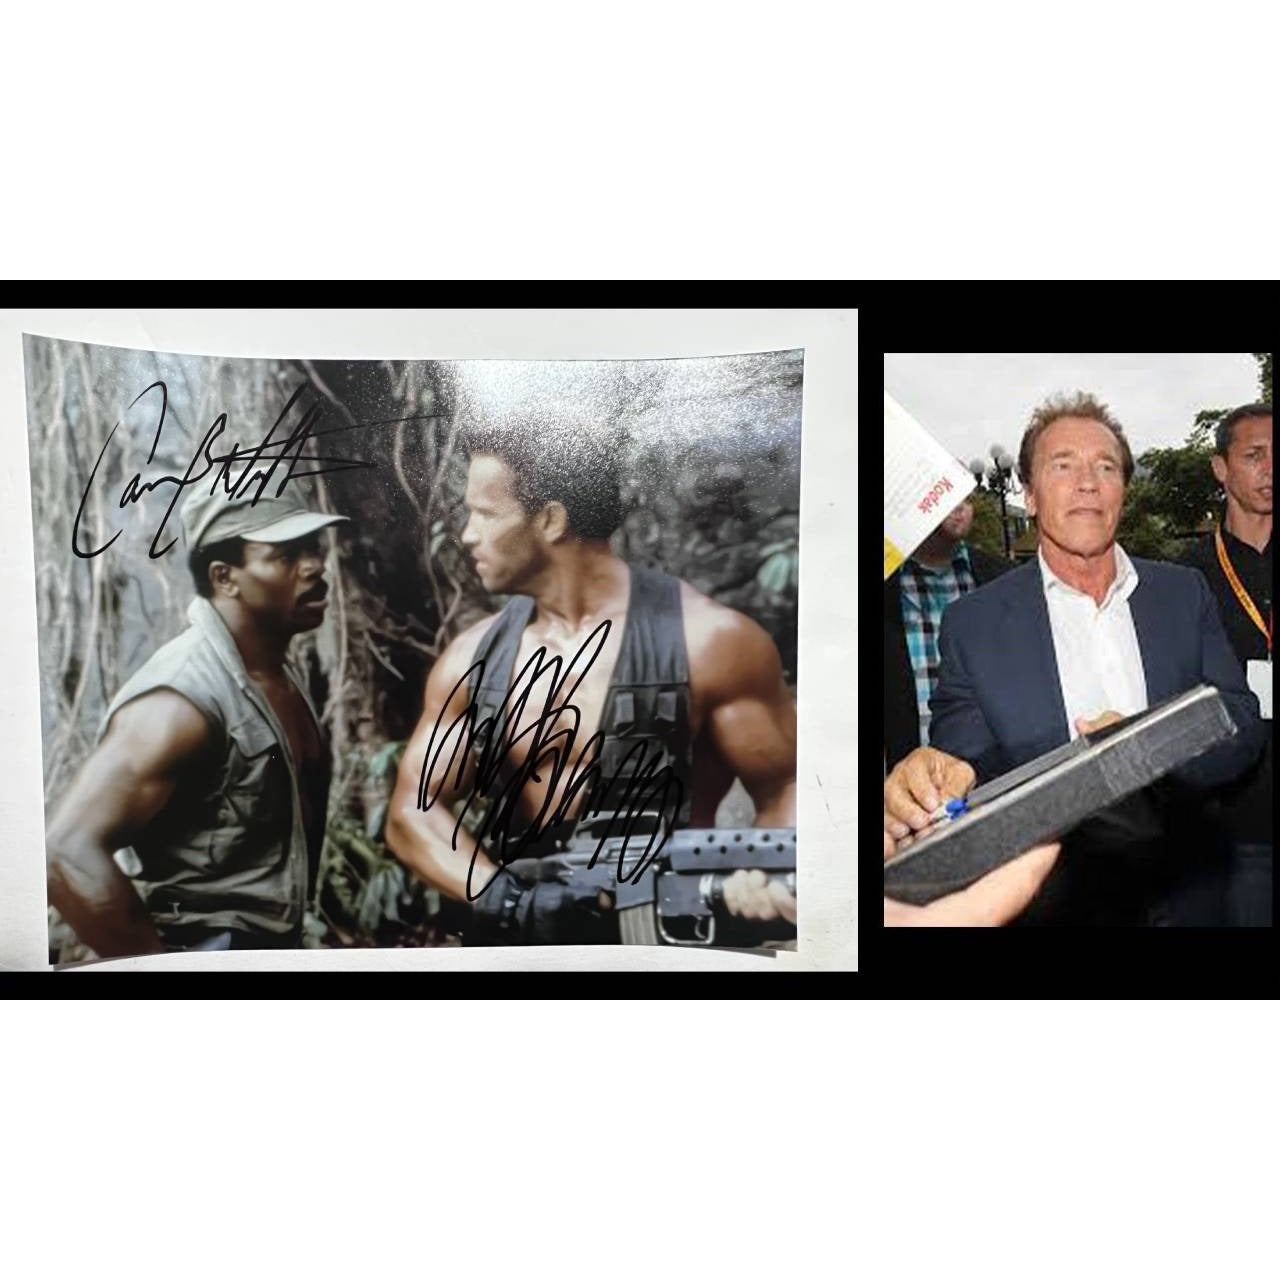 Arnold Schwarzenegger and Carl's Weathers Commando 8x10 photo signed with proof